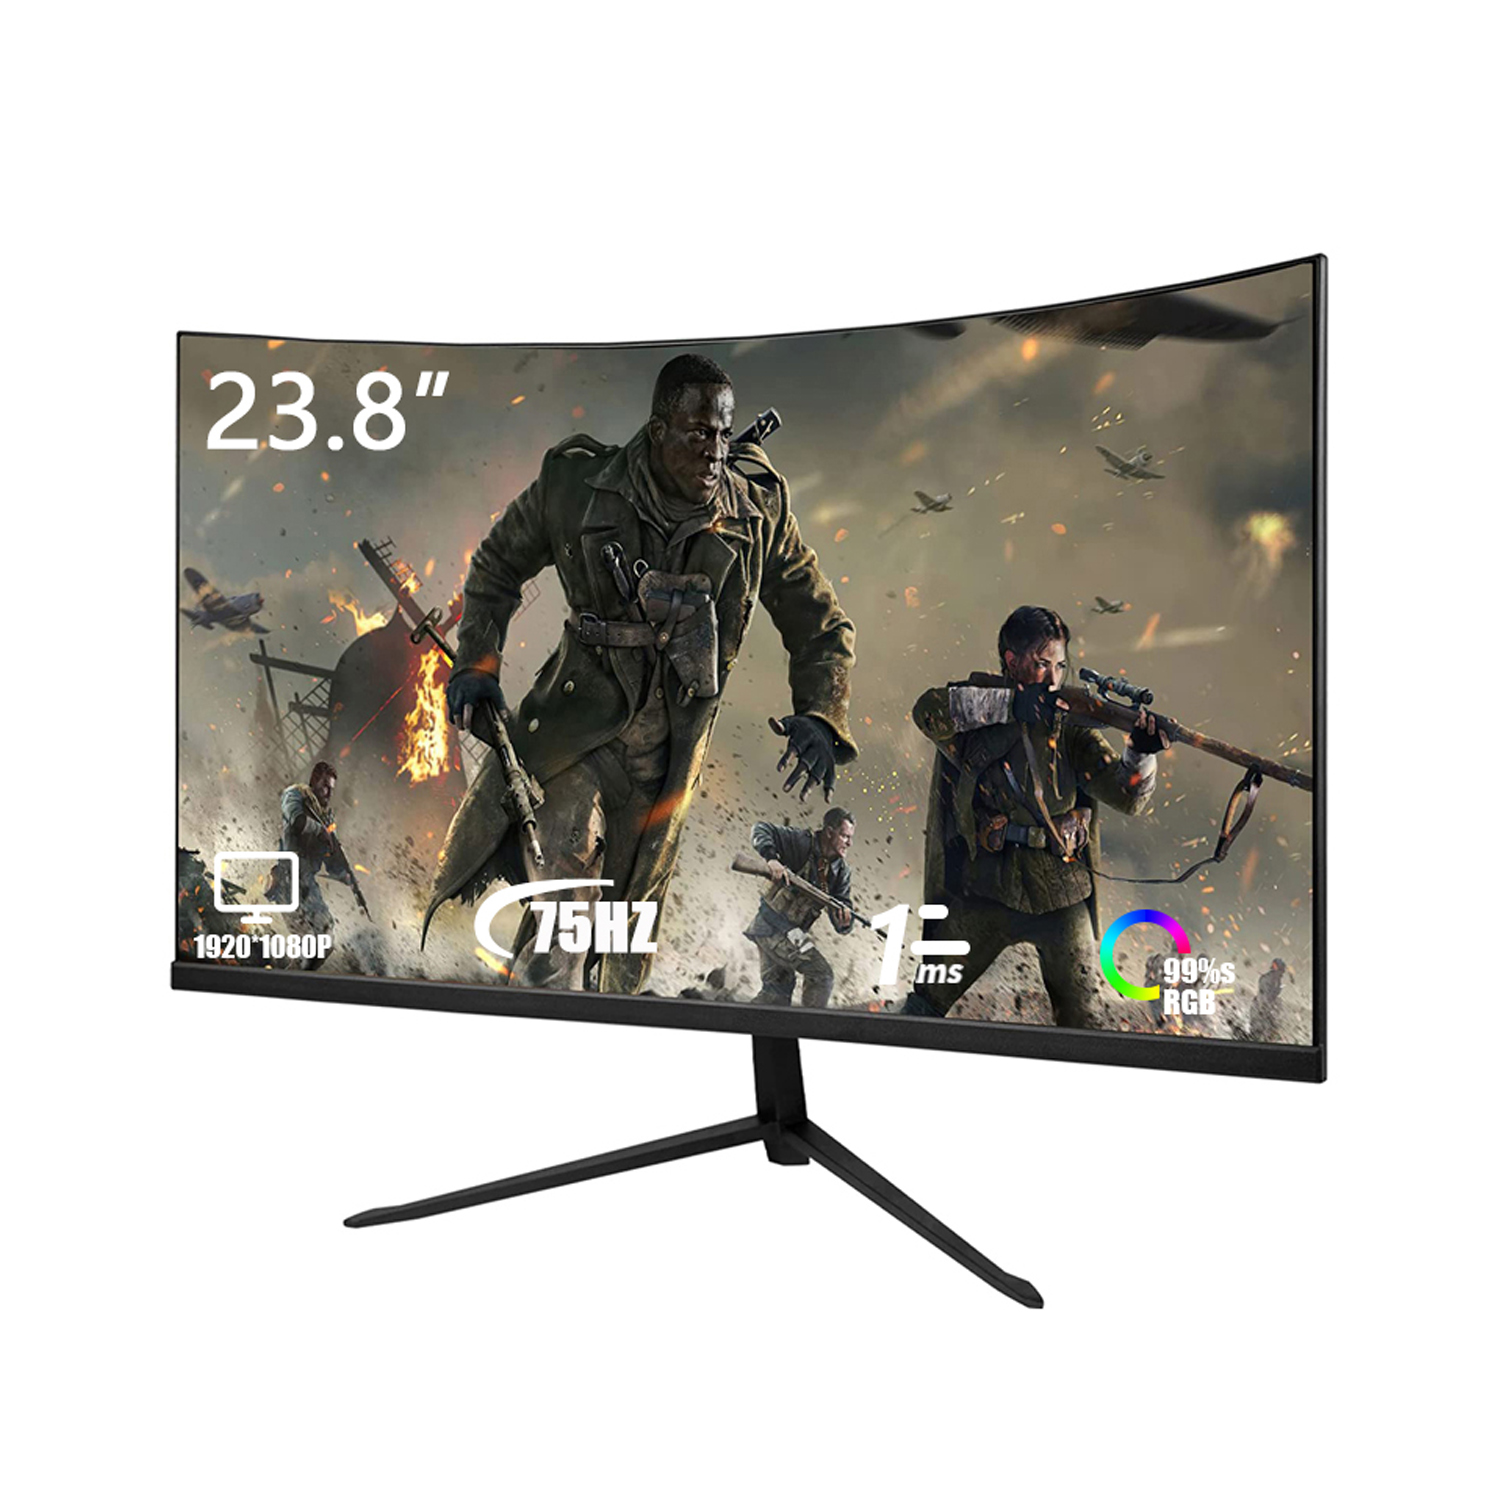 23.8 inch IPS Curved Screen Monitor with Full HD (1920x1080) Display,75Hz Refresh Rate ,HDMI Ports for Home Office Gaming Black